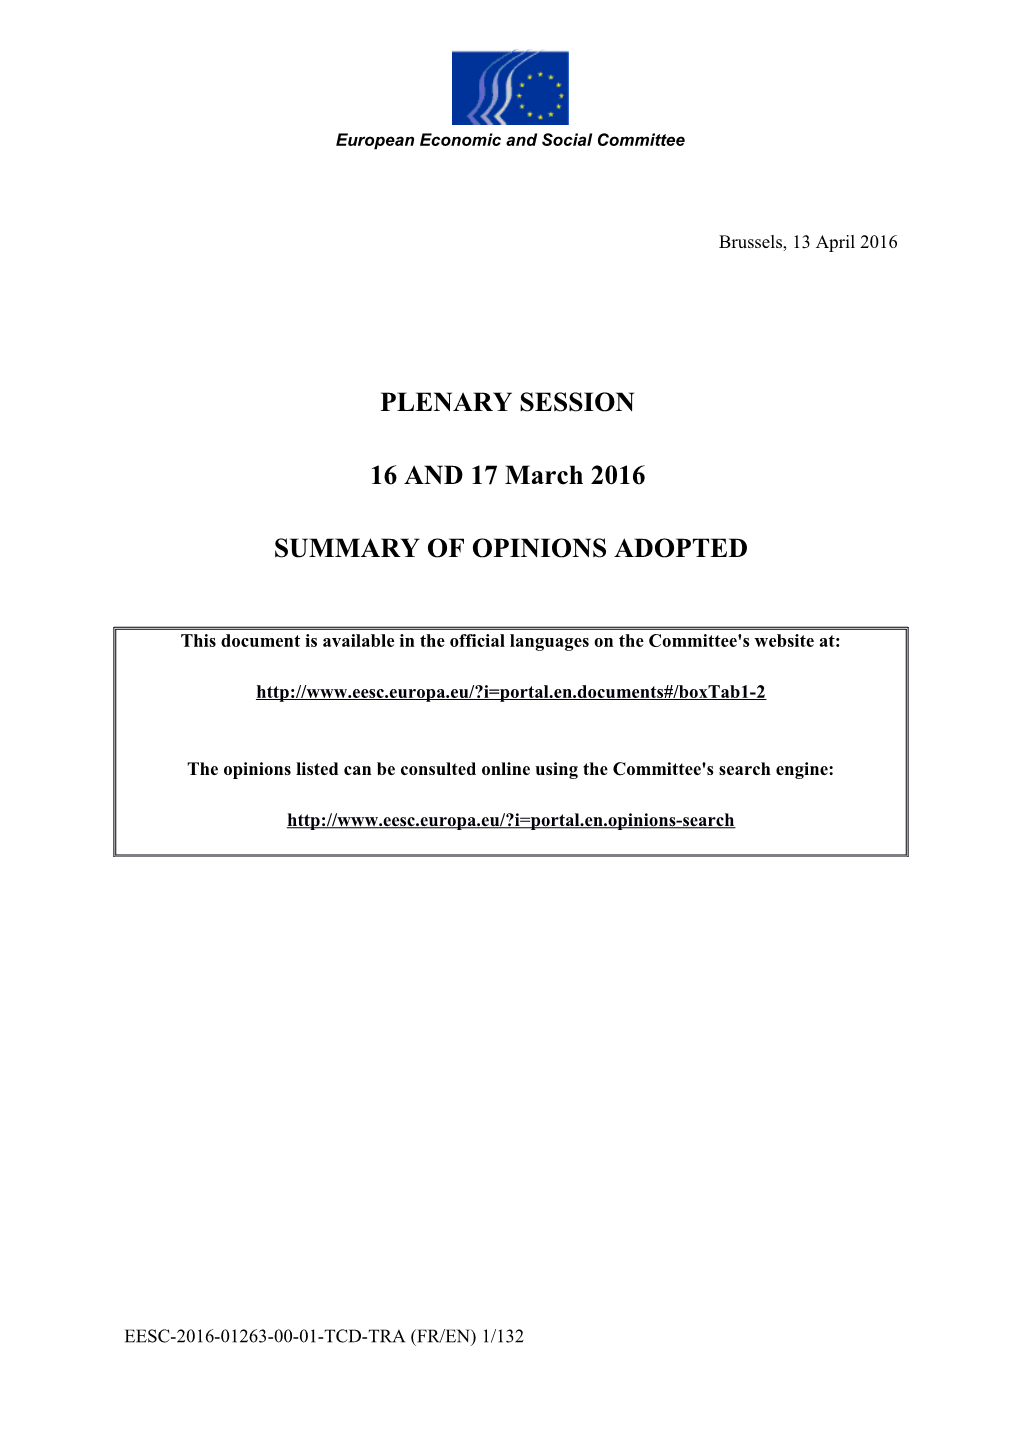 March Summary of Opinions Adopted